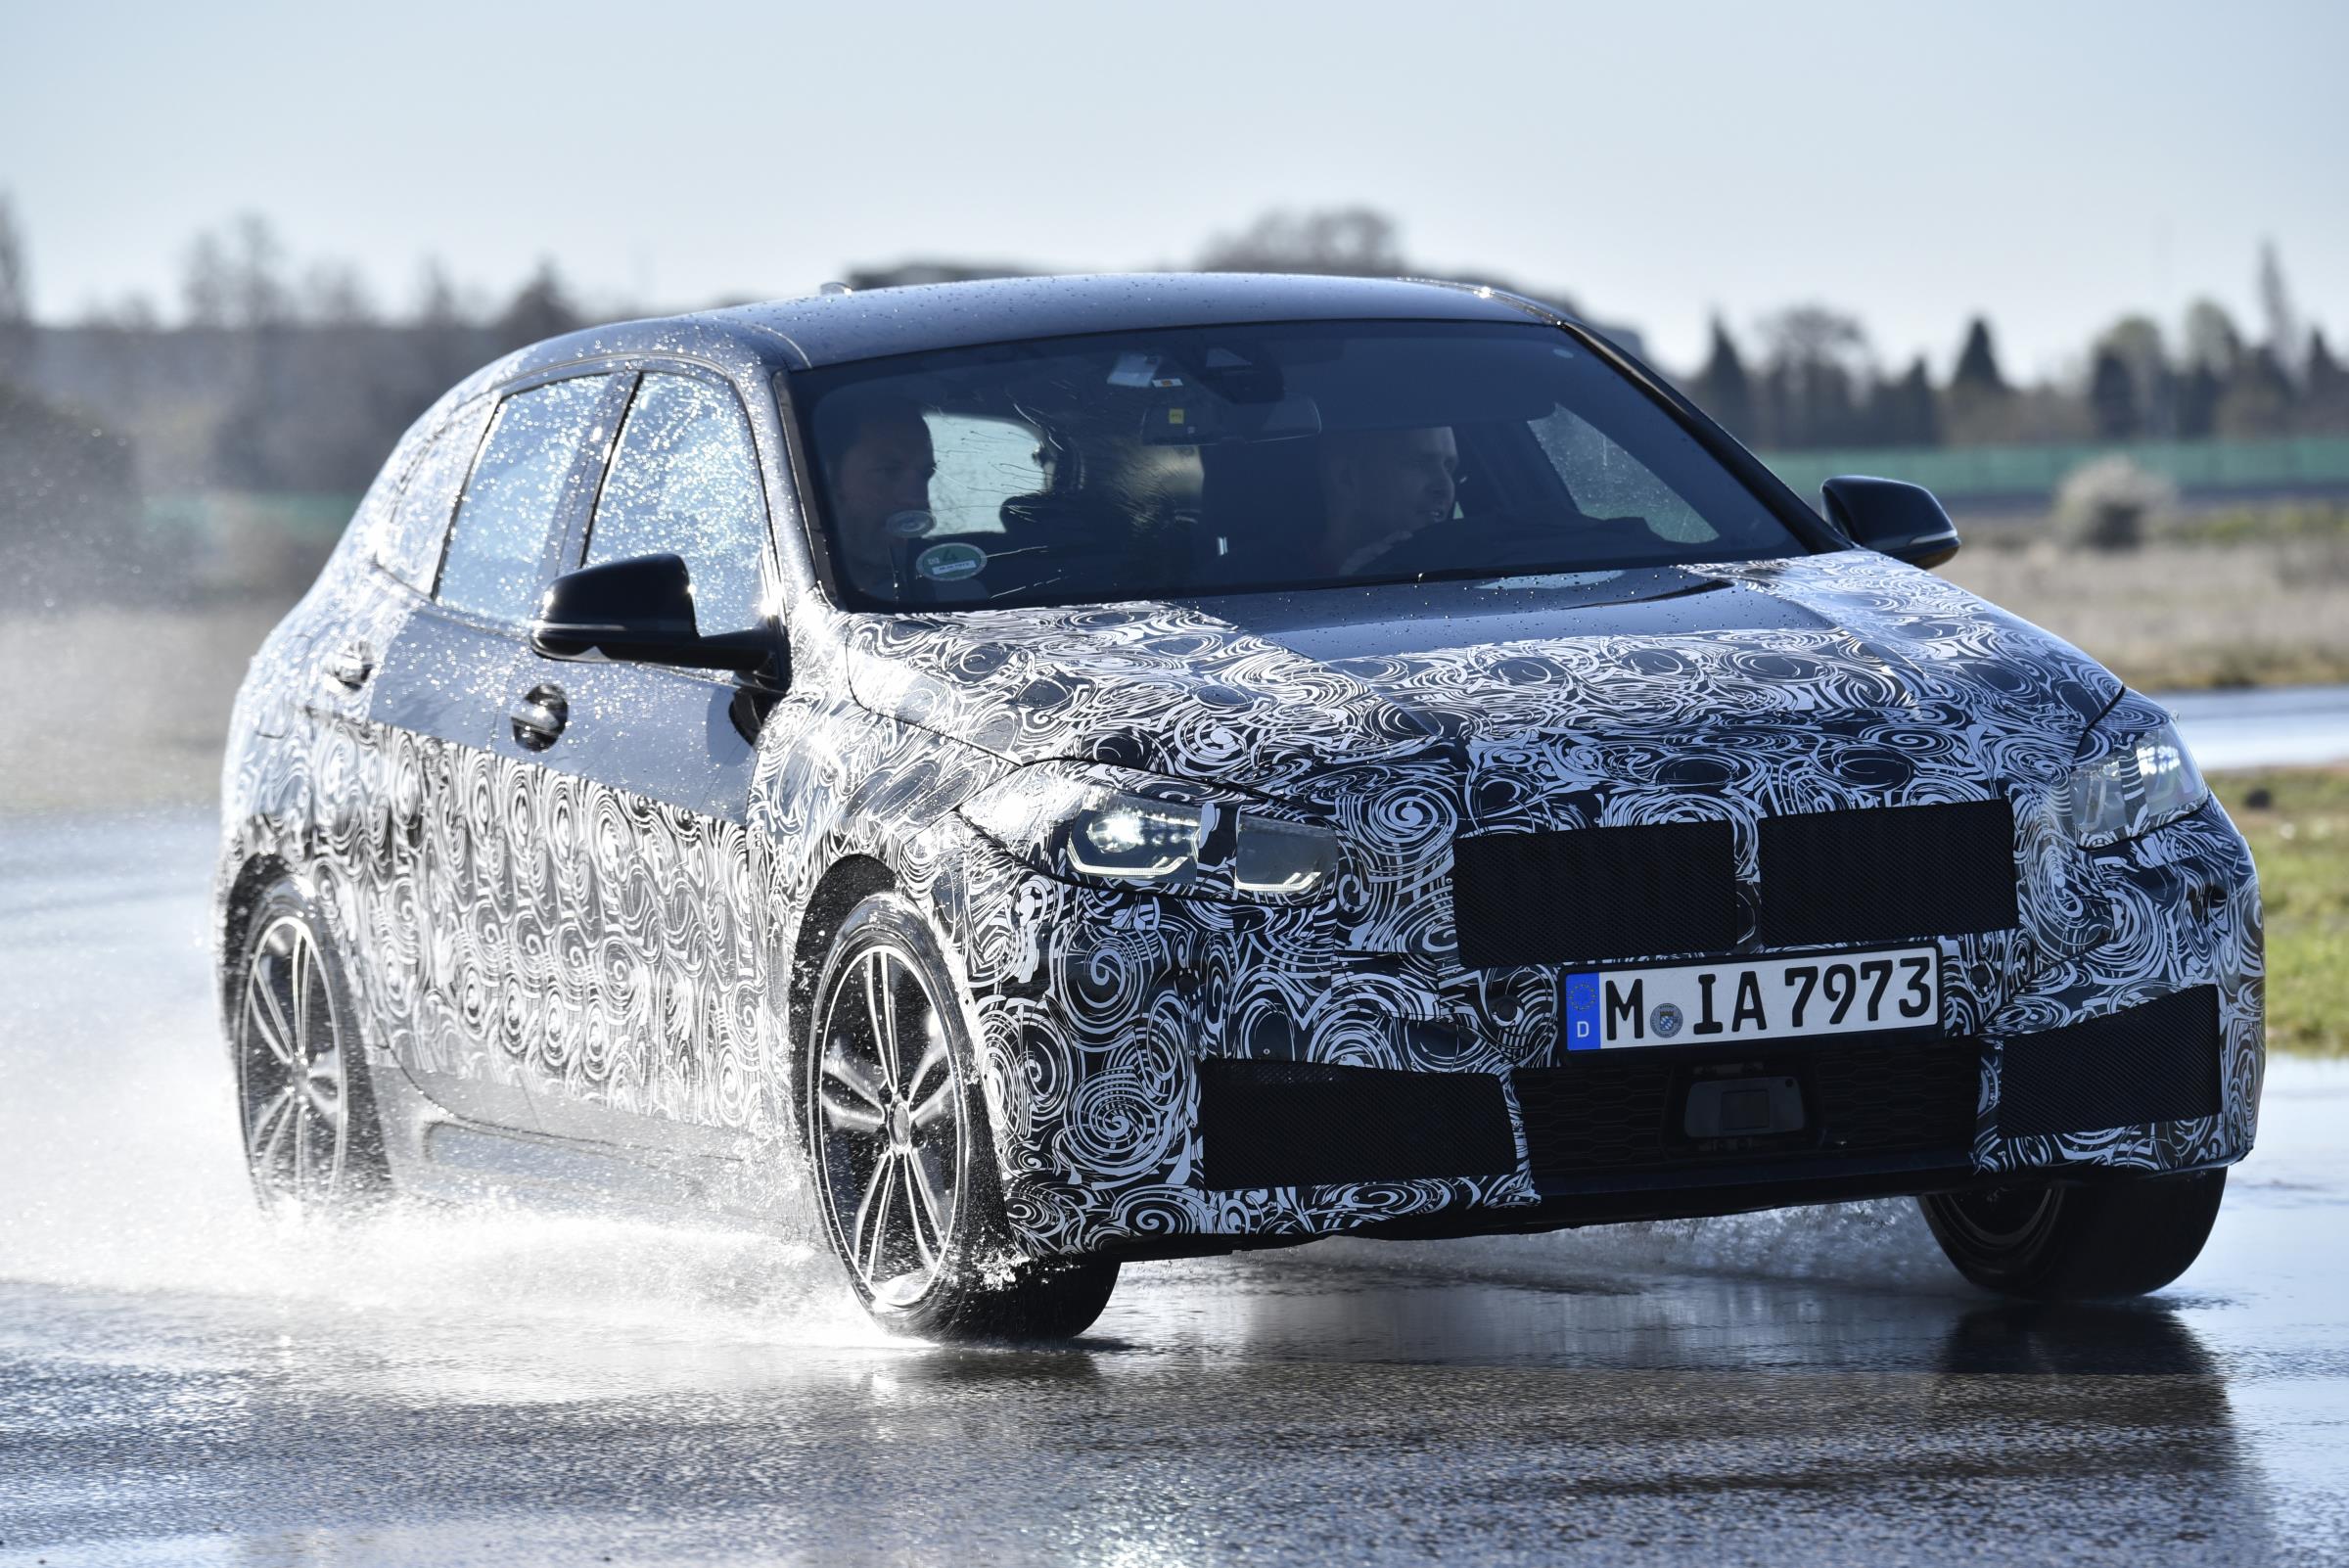 2020 BMW 1 Series details revealed, M135i xDrive confirmed